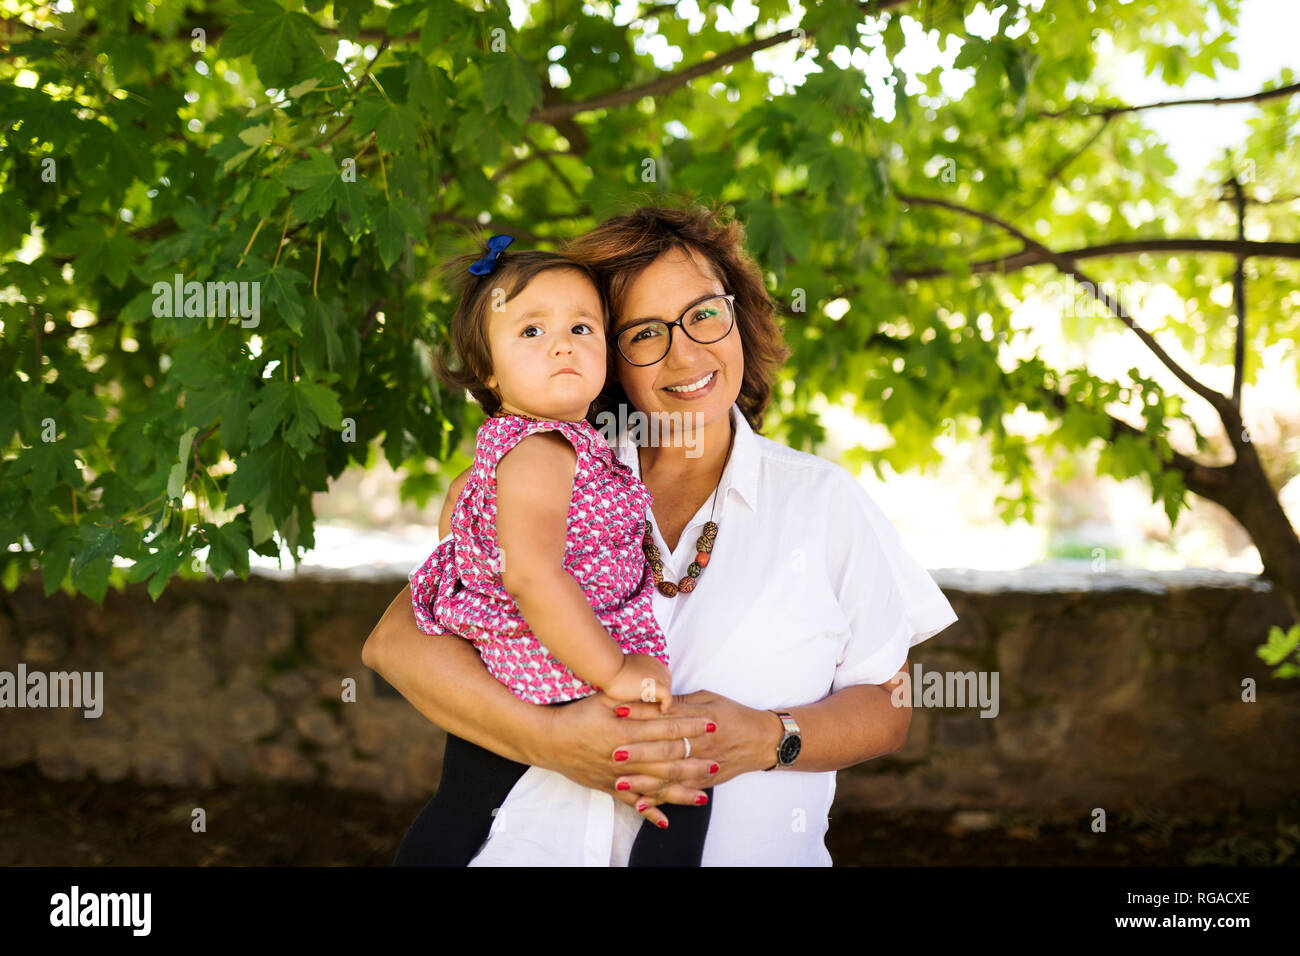 Portrait of smiling mature woman with baby girl Banque D'Images